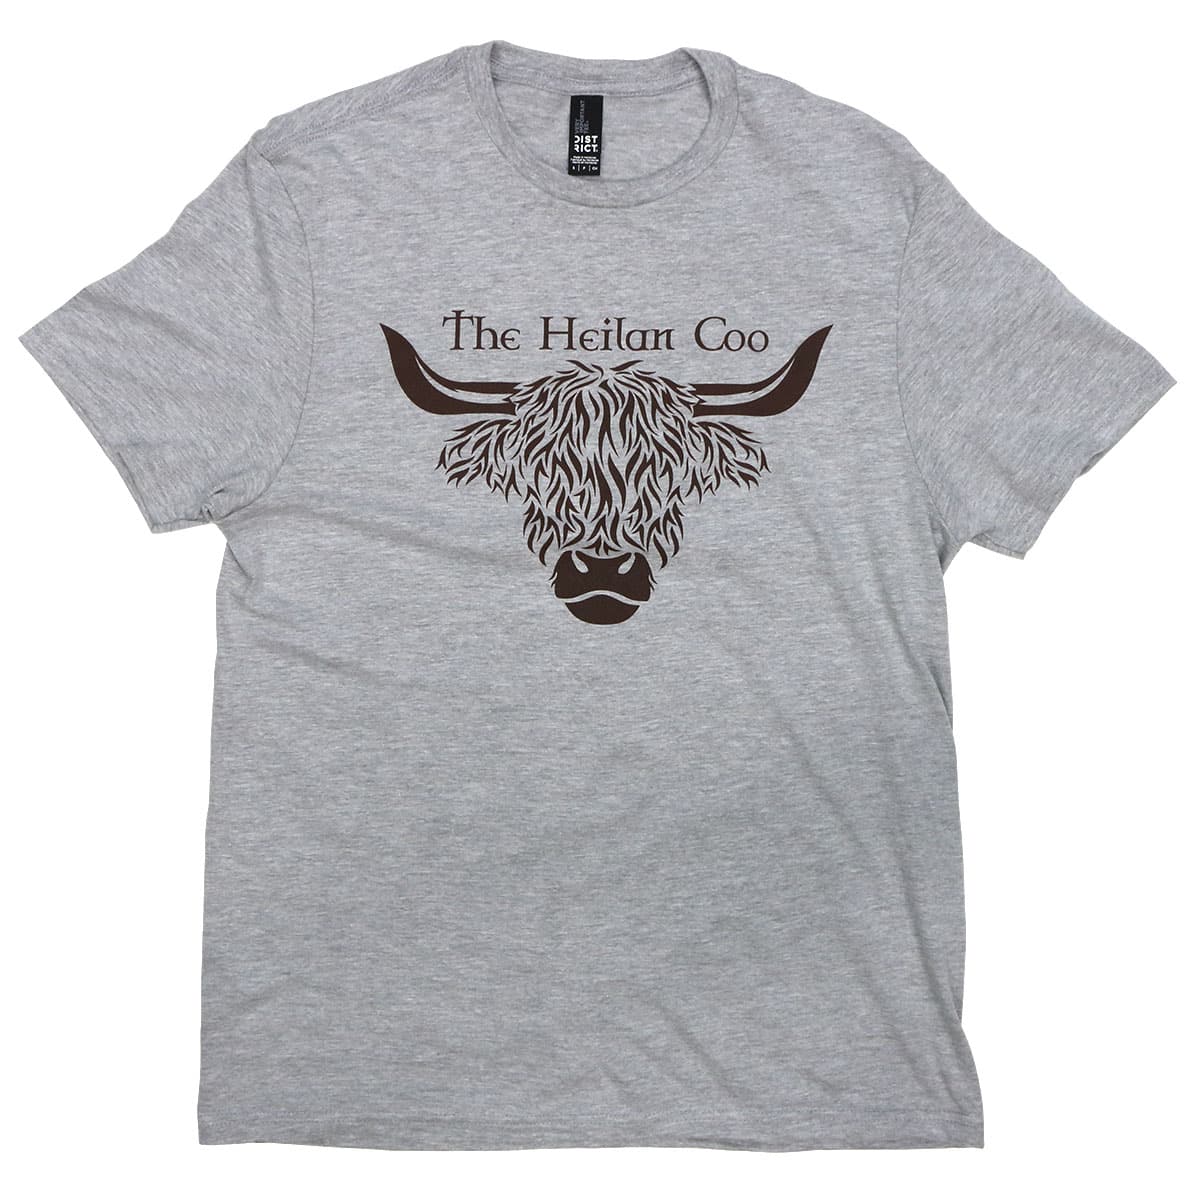 The highland cow Dire Wolf T-Shirt.